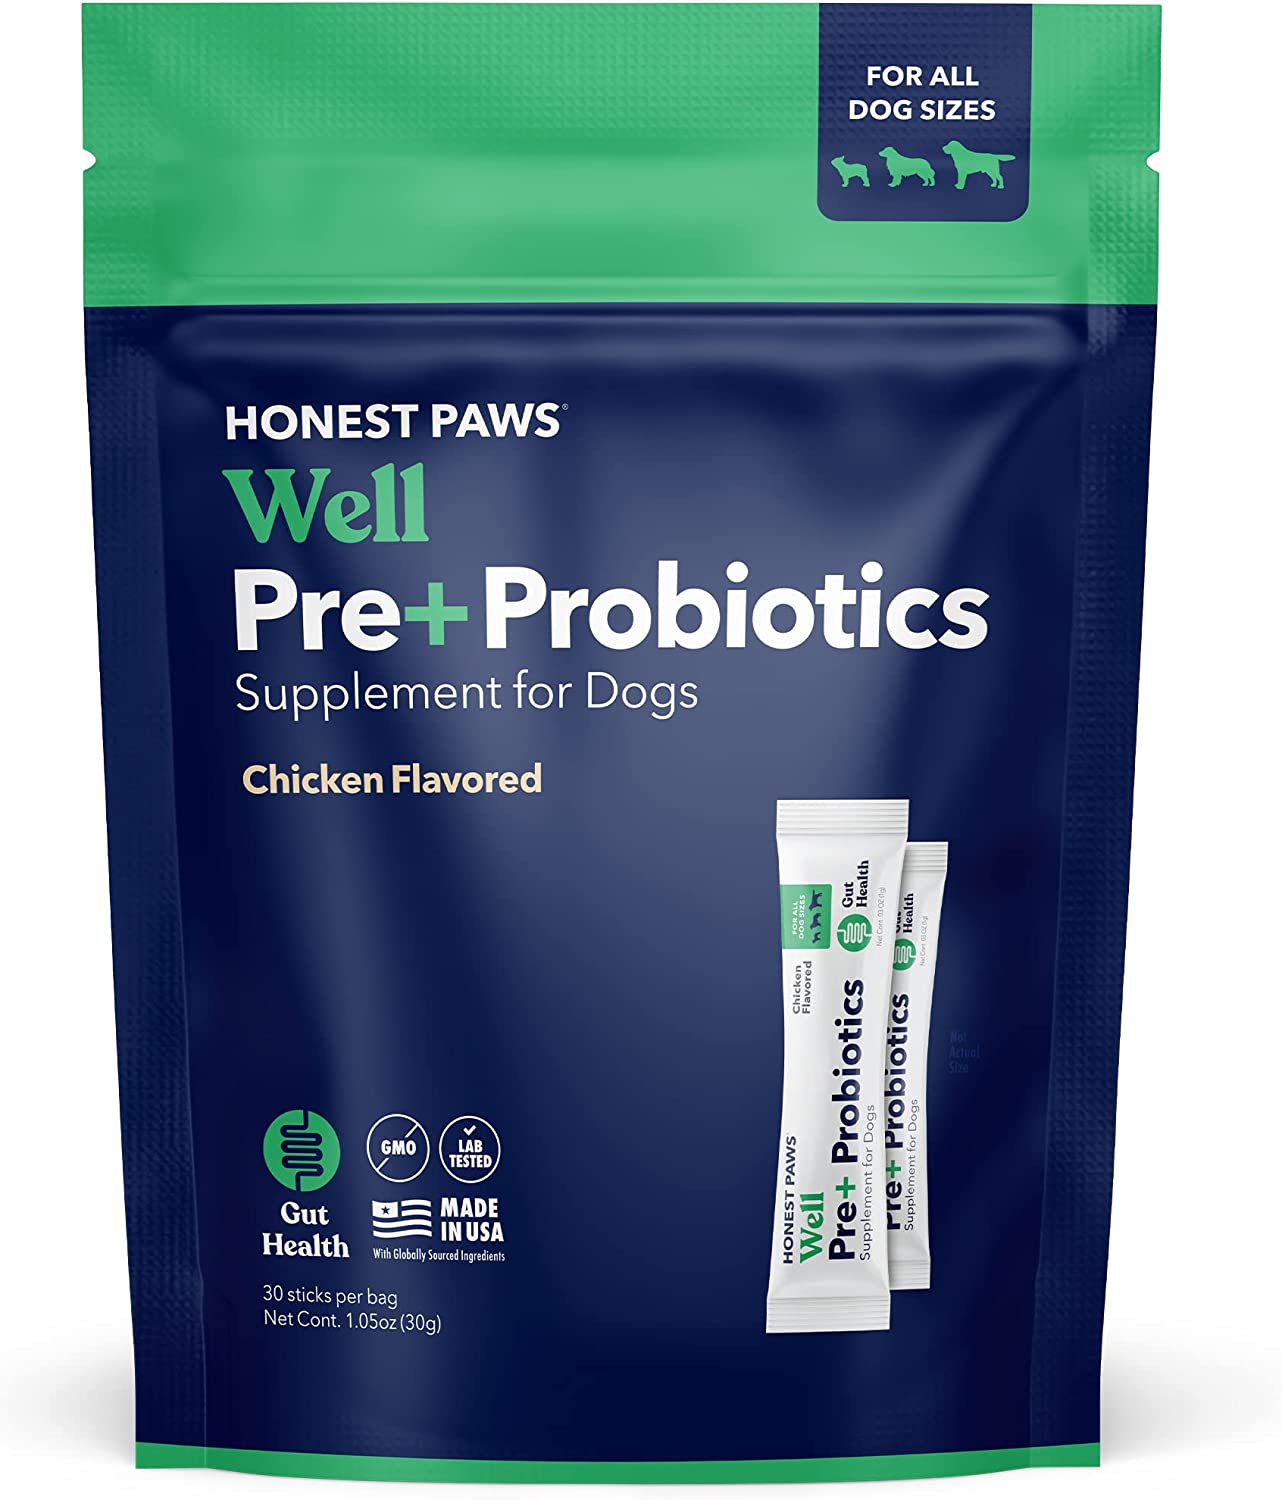 Honest Paws Well Pre+ Probiotic Digestive Support